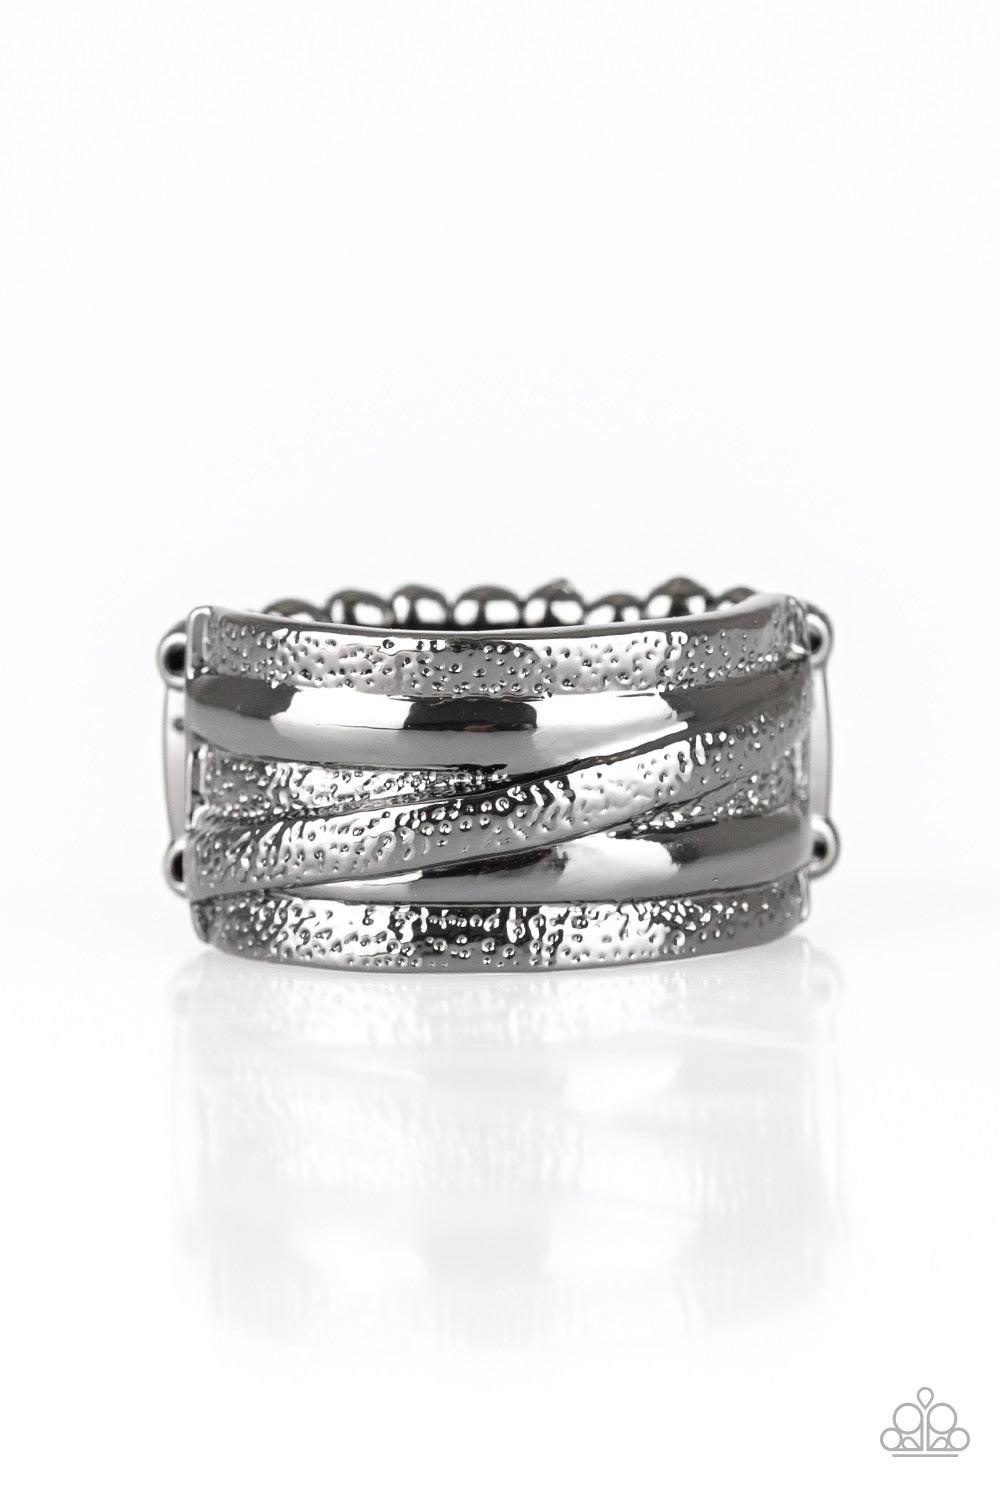 Paparazzi Accessories Rise And Shine - Black Delicately hammered in shimmery textures, glistening gunmetal bands wrap around the finger for a refined look. Features a stretchy band for a flexible fit. Sold as one individual ring. Jewelry